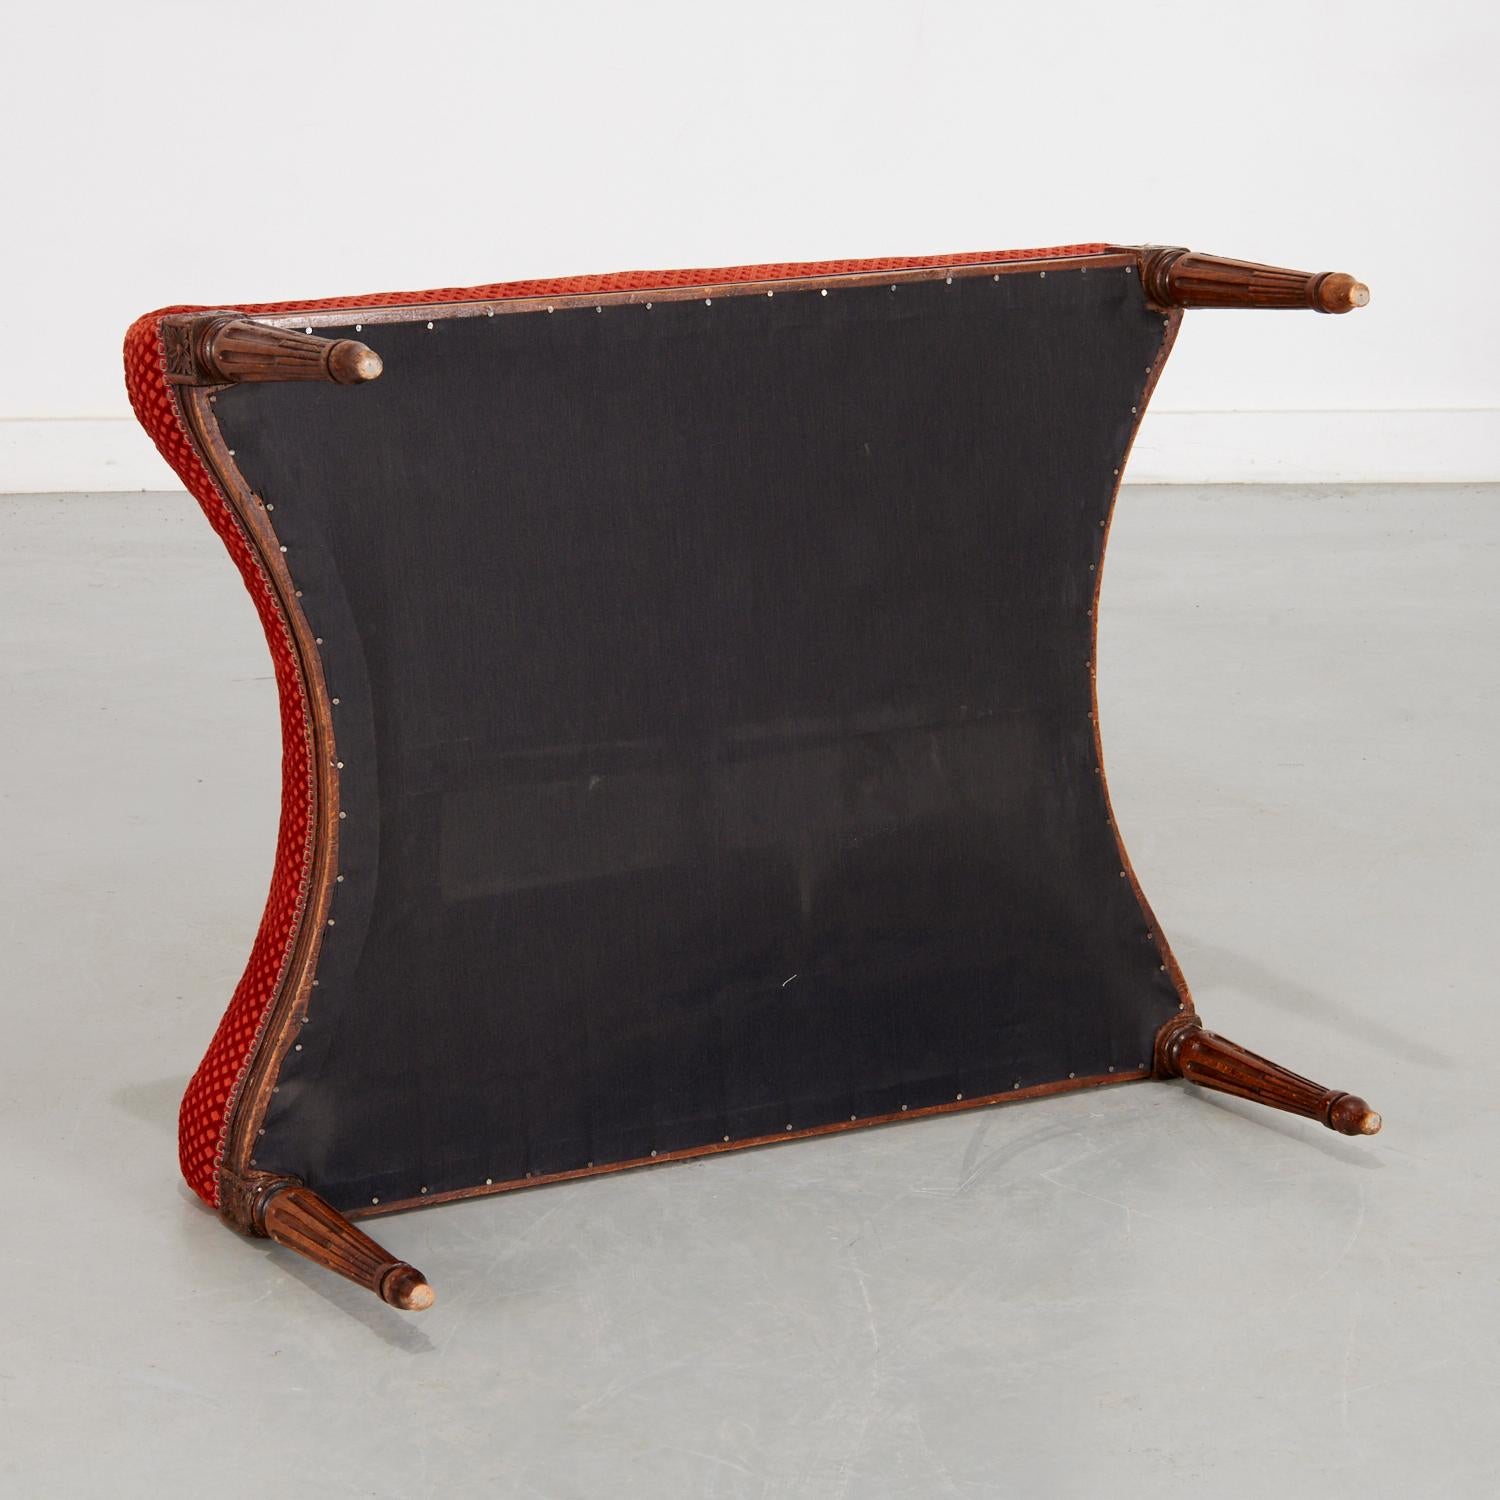 Late 20th Century 20th C. Louis VXI Style Tabouret Upholstered in Cut Velvet with Gimp Braid Trim